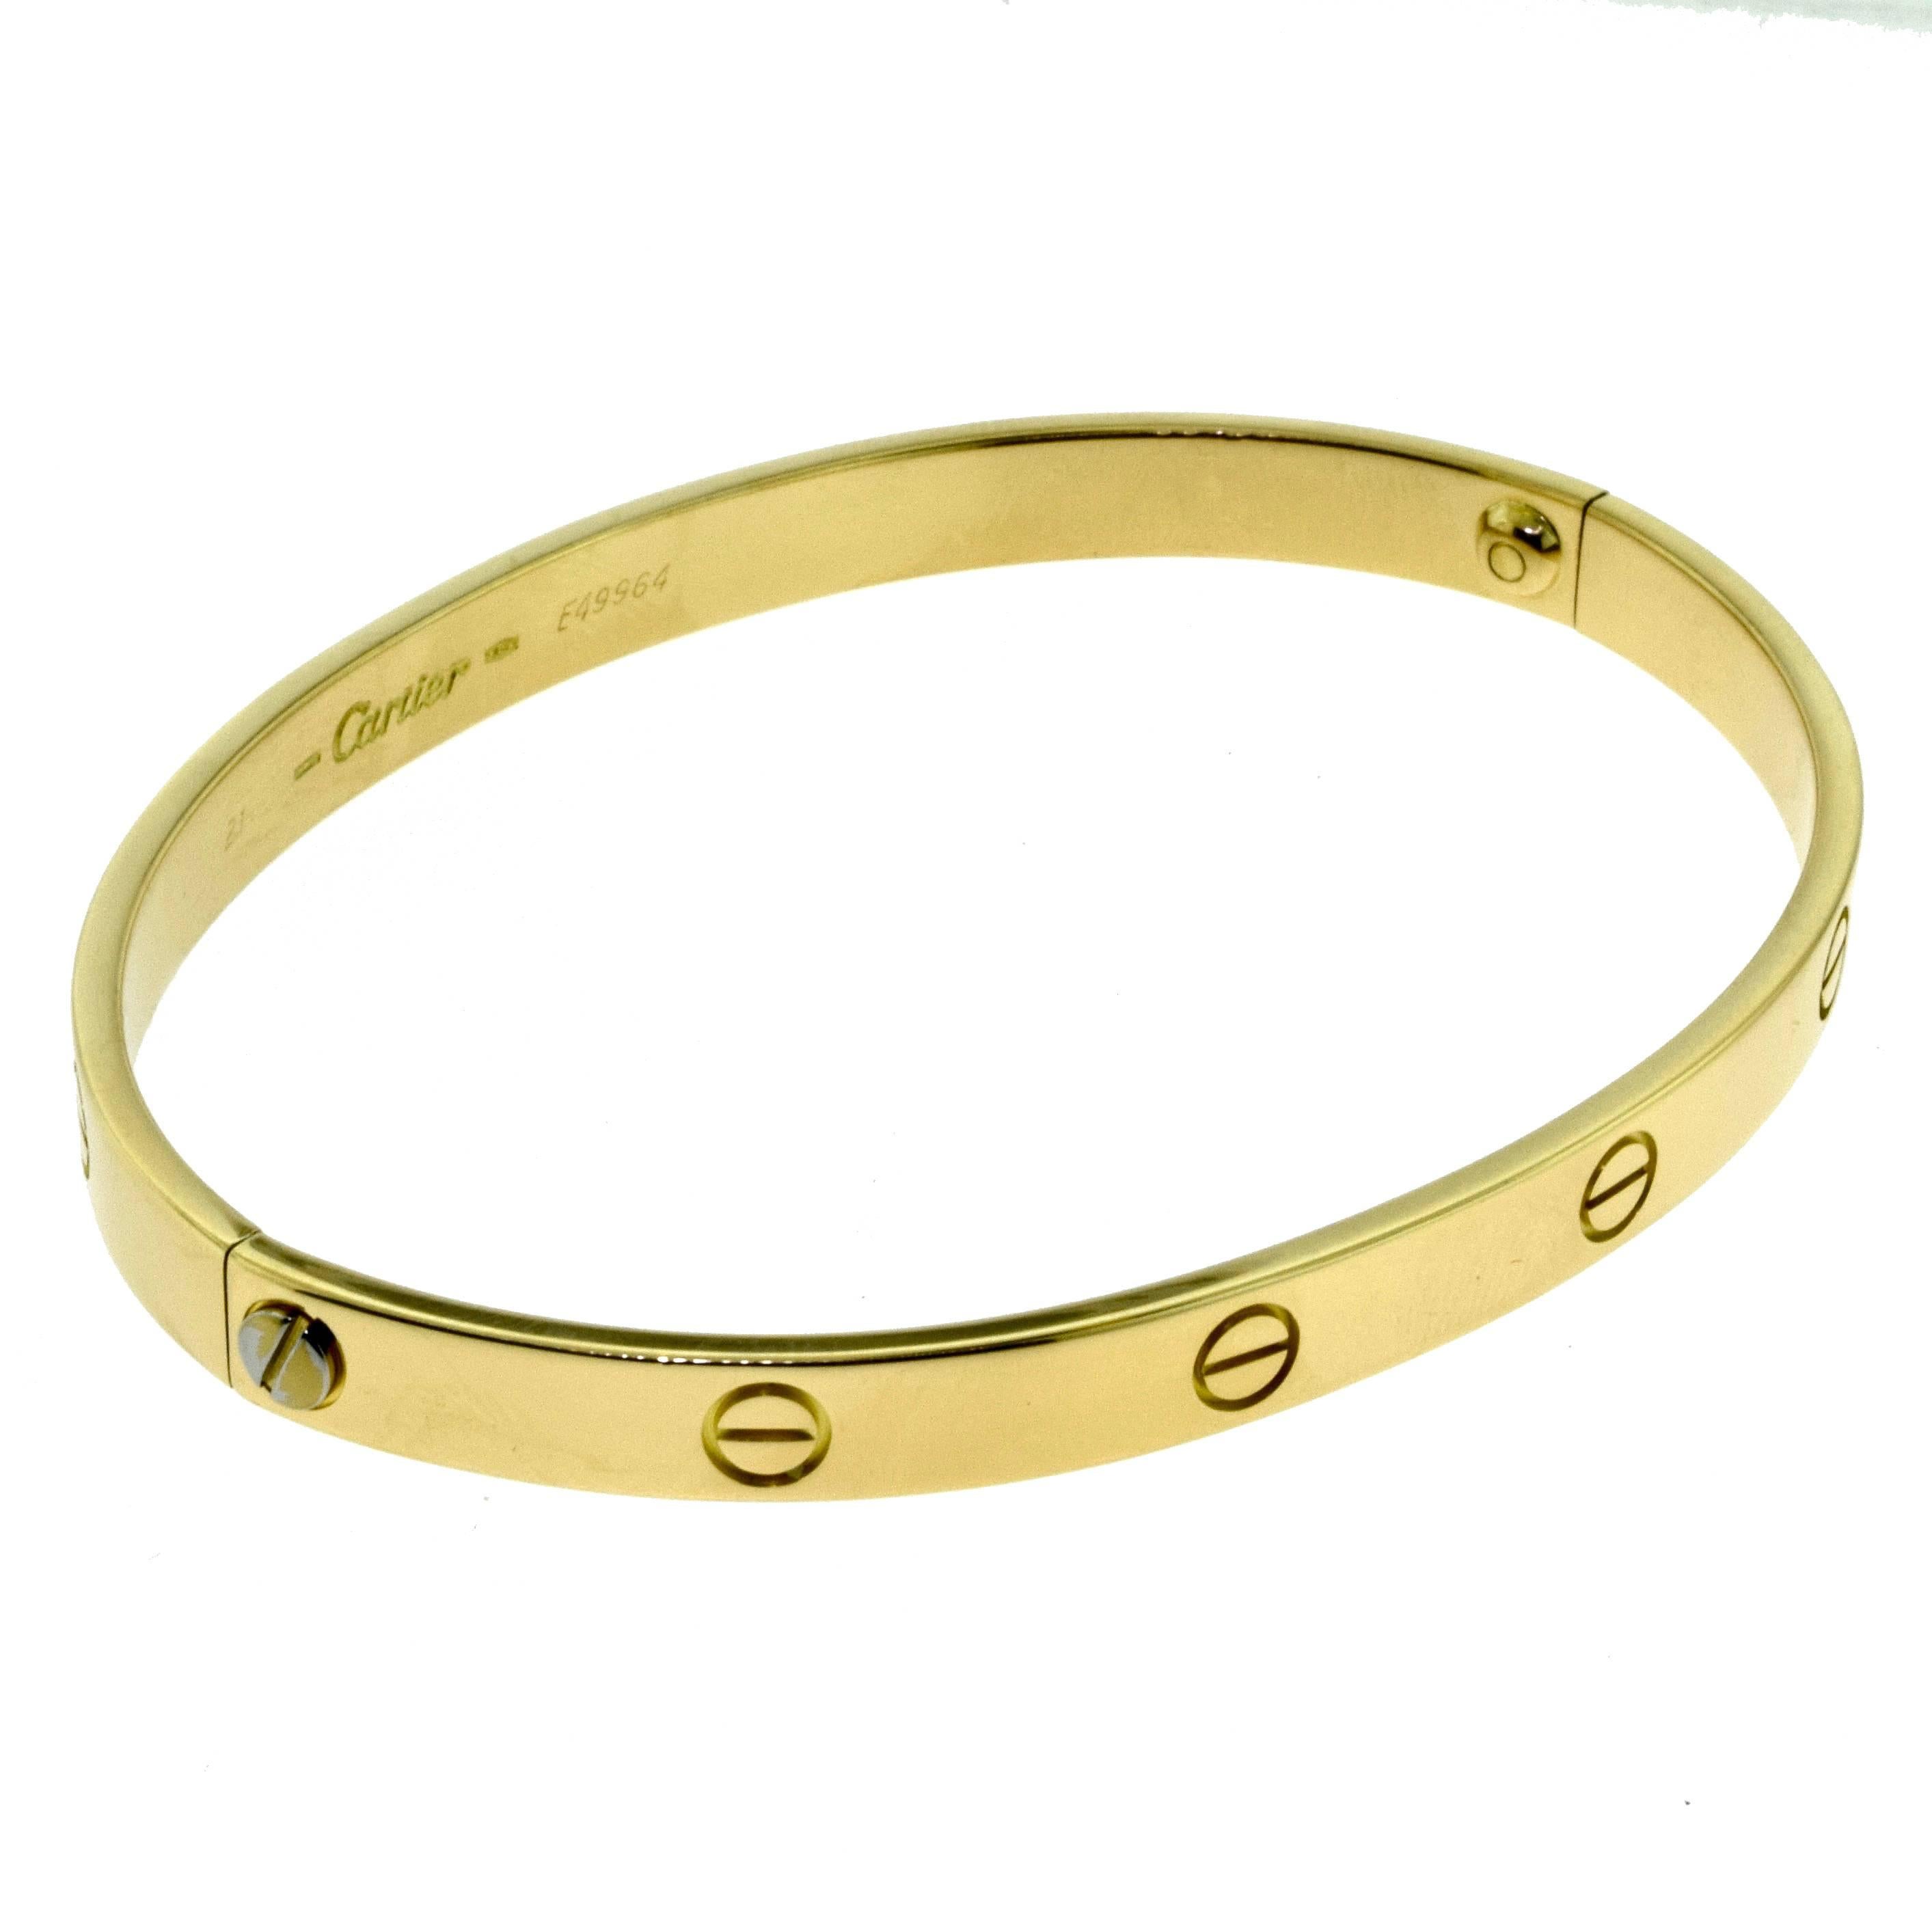 From Cartier's LOVE Collection:
A gorgeous 18 Karat Yellow Gold LOVE Bangle in Size 21 (21 cm). 

Total Item Weight (g): 38.8
Hallmark: Cartier 750 Serial No.
Screw System: Old Screw
Retail: $6,300.00 (excl. sales tax)
Comes with Box and Screwdriver